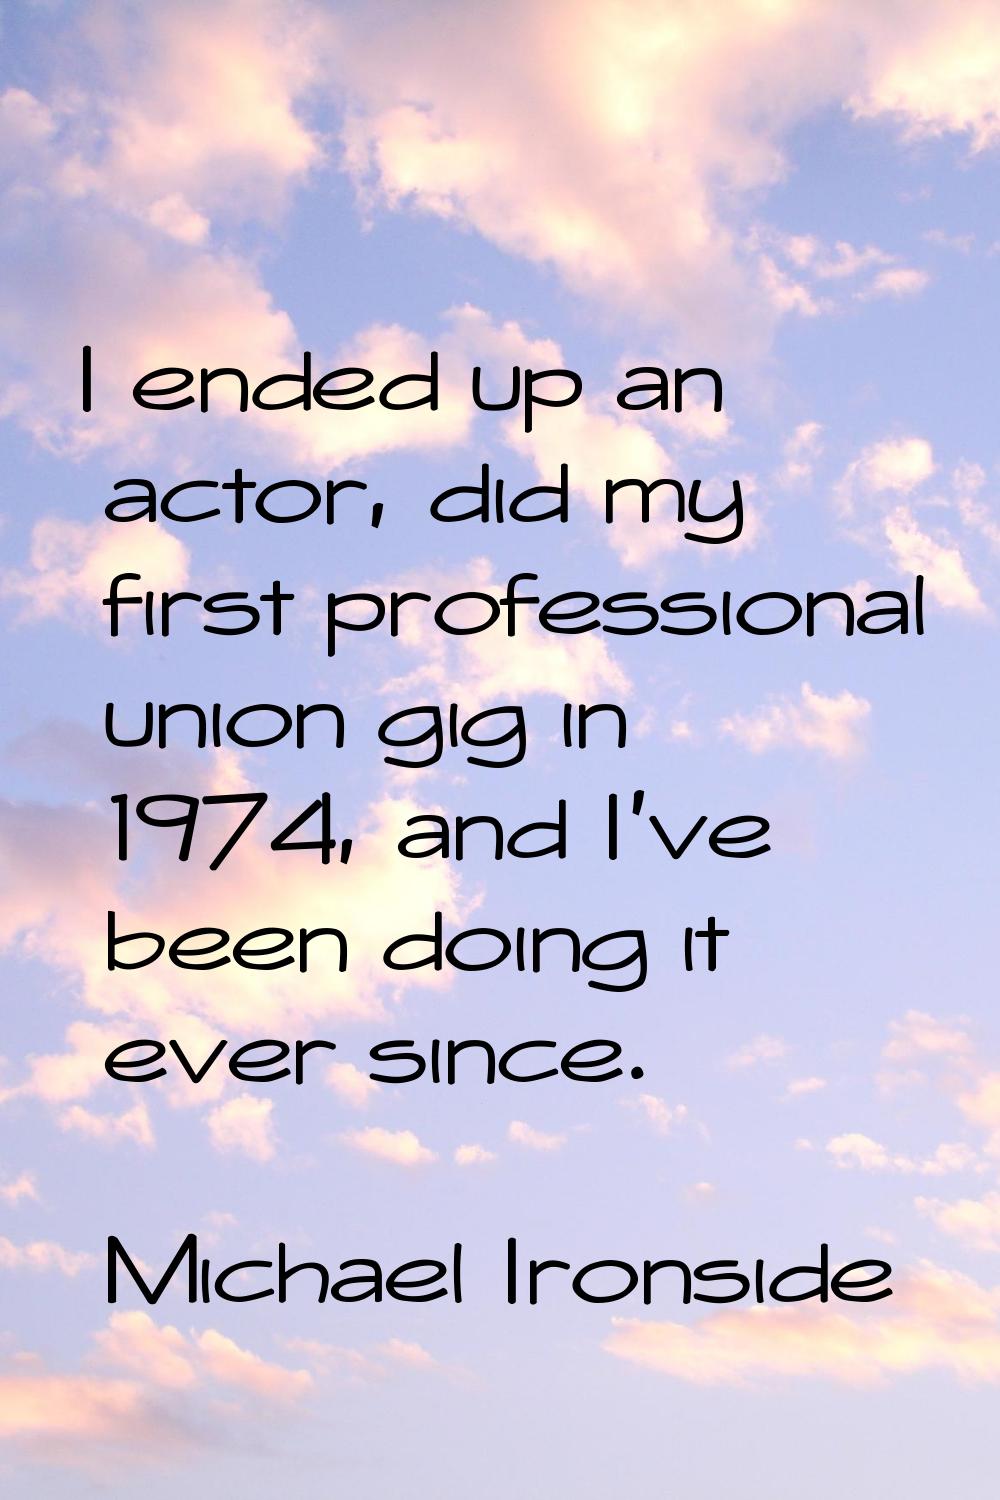 I ended up an actor, did my first professional union gig in 1974, and I've been doing it ever since